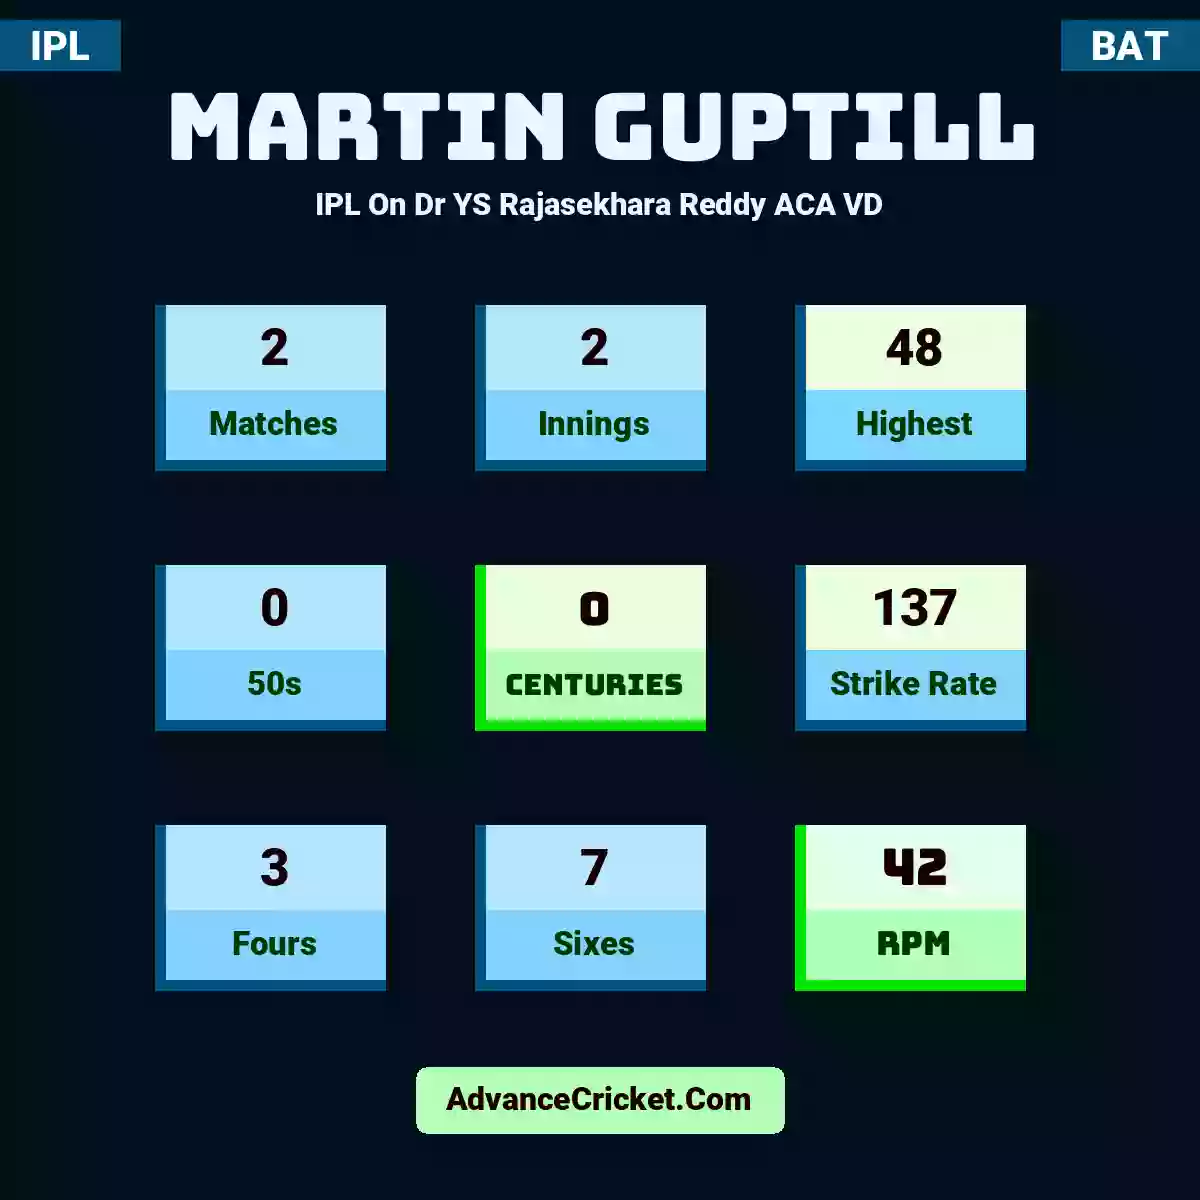 Martin Guptill IPL  On Dr YS Rajasekhara Reddy ACA VD, Martin Guptill played 2 matches, scored 48 runs as highest, 0 half-centuries, and 0 centuries, with a strike rate of 137. M.Guptill hit 3 fours and 7 sixes, with an RPM of 42.